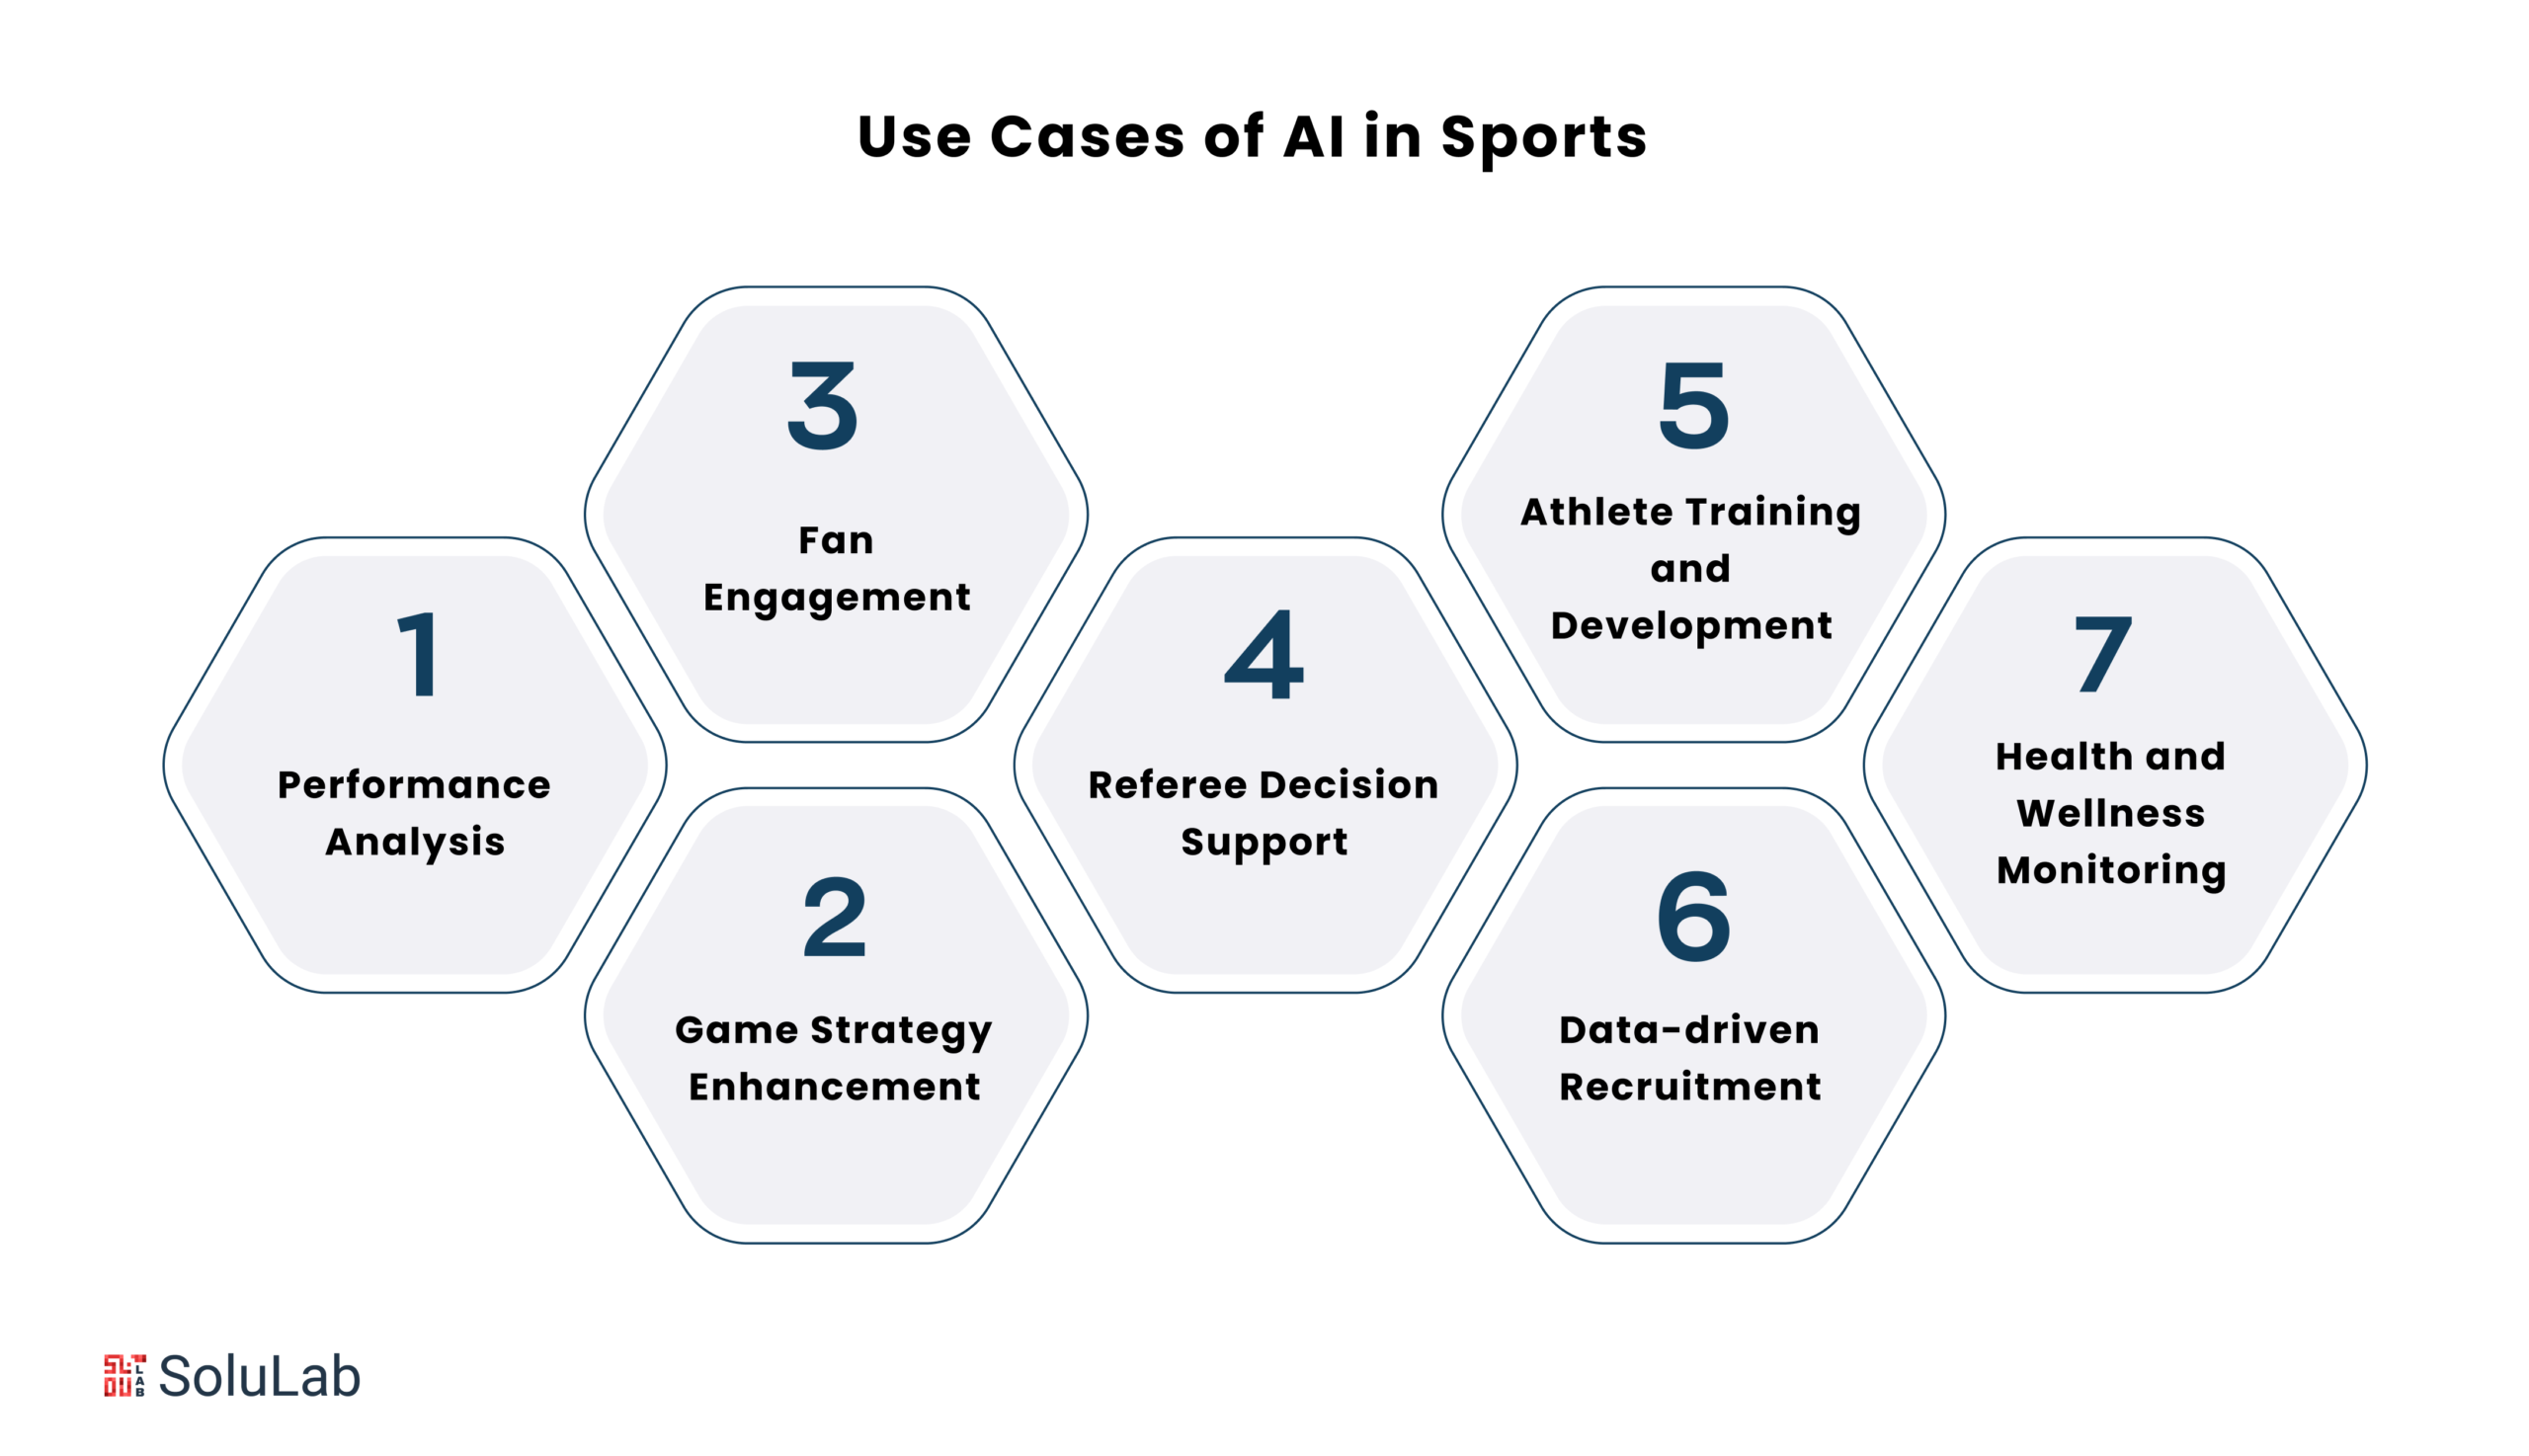 Use Cases of AI in Sports